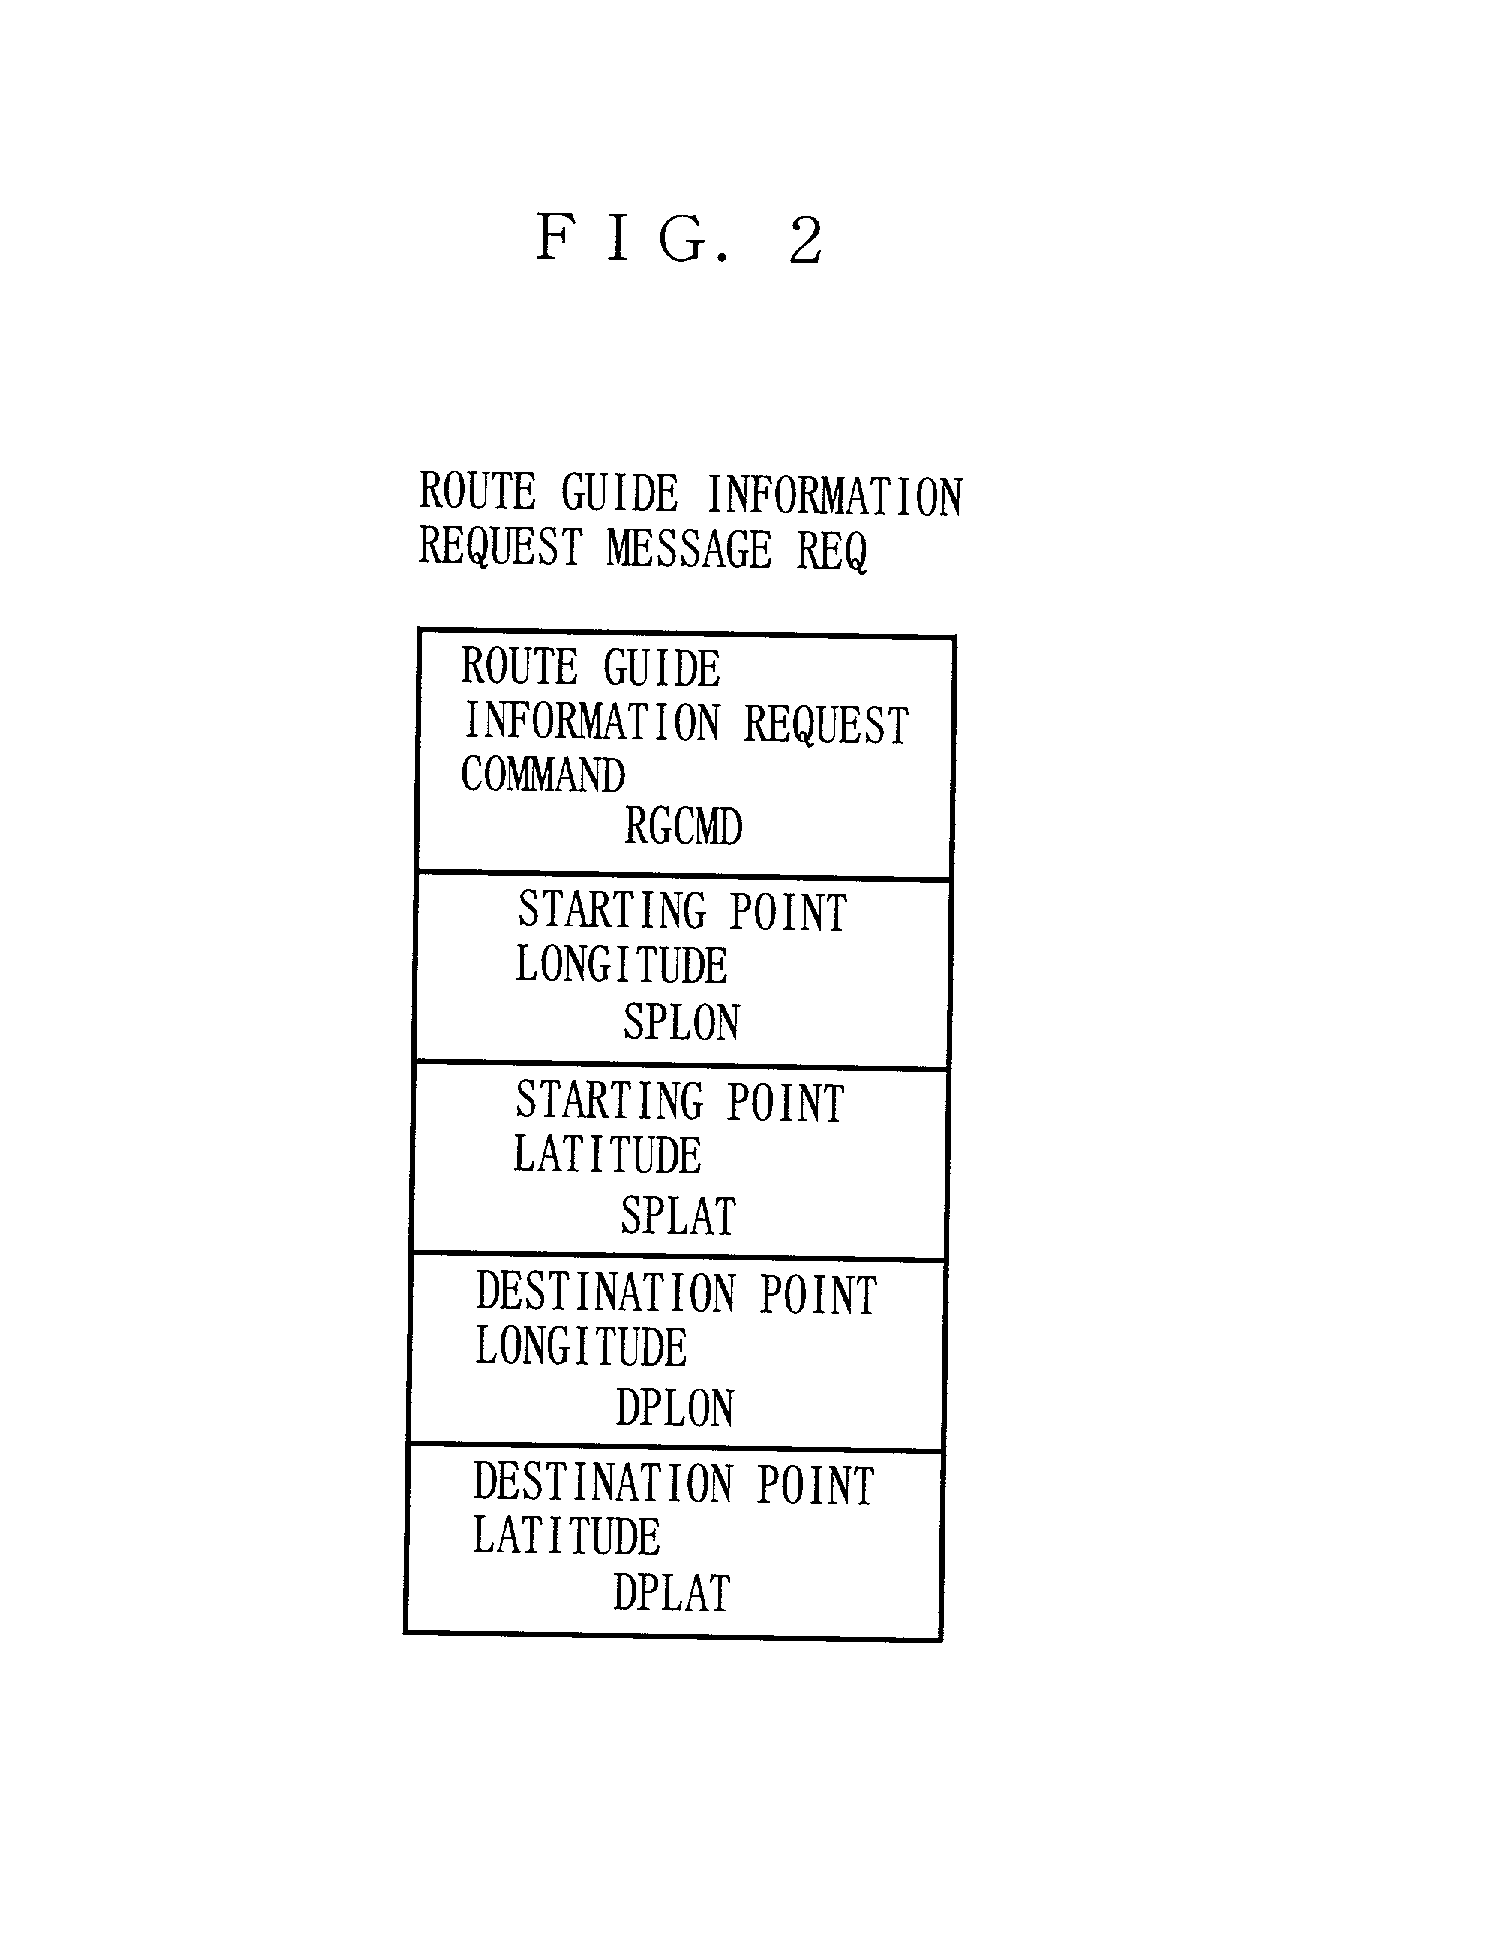 Route guide information distributing system